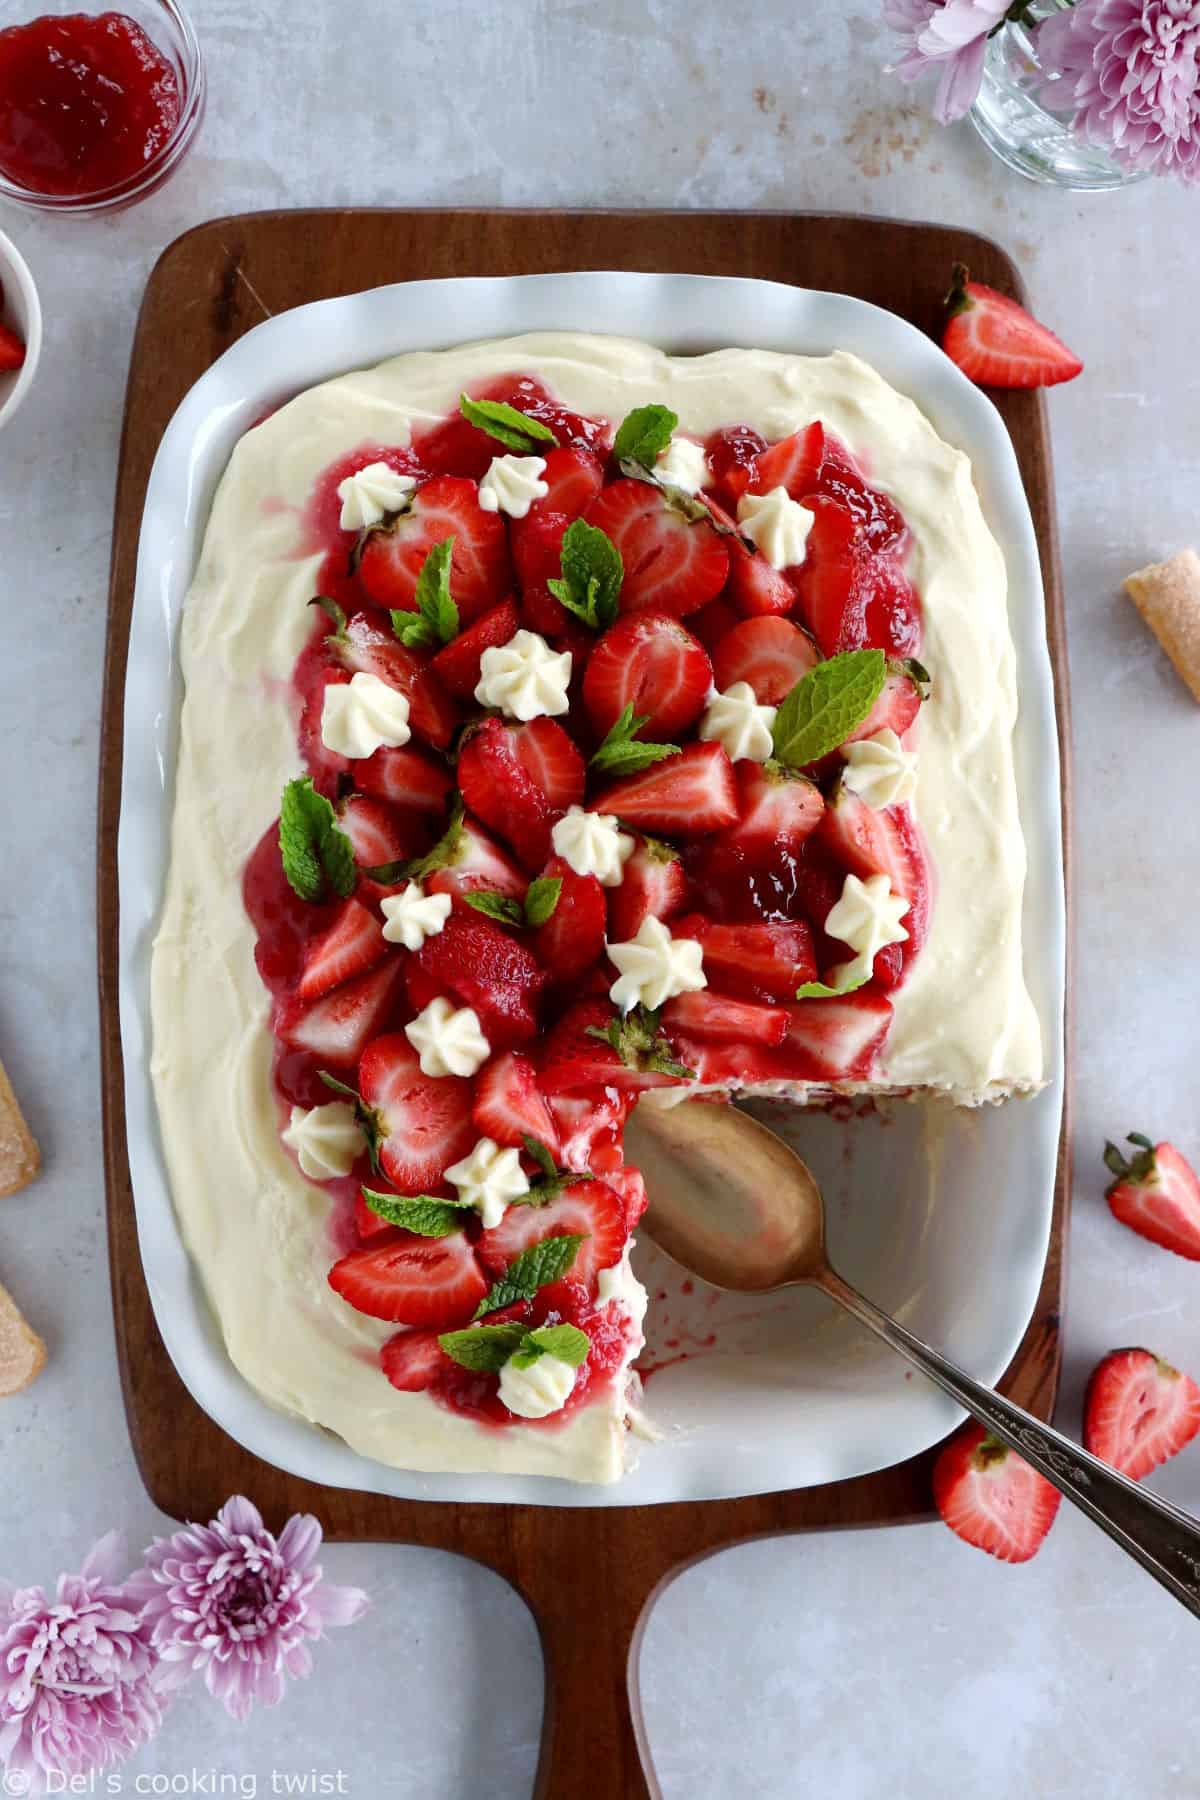 This strawberry tiramisu is made with fresh strawberries, soaked ladyfingers and a creamy mascarpone filling that doesn't contain raw eggs.